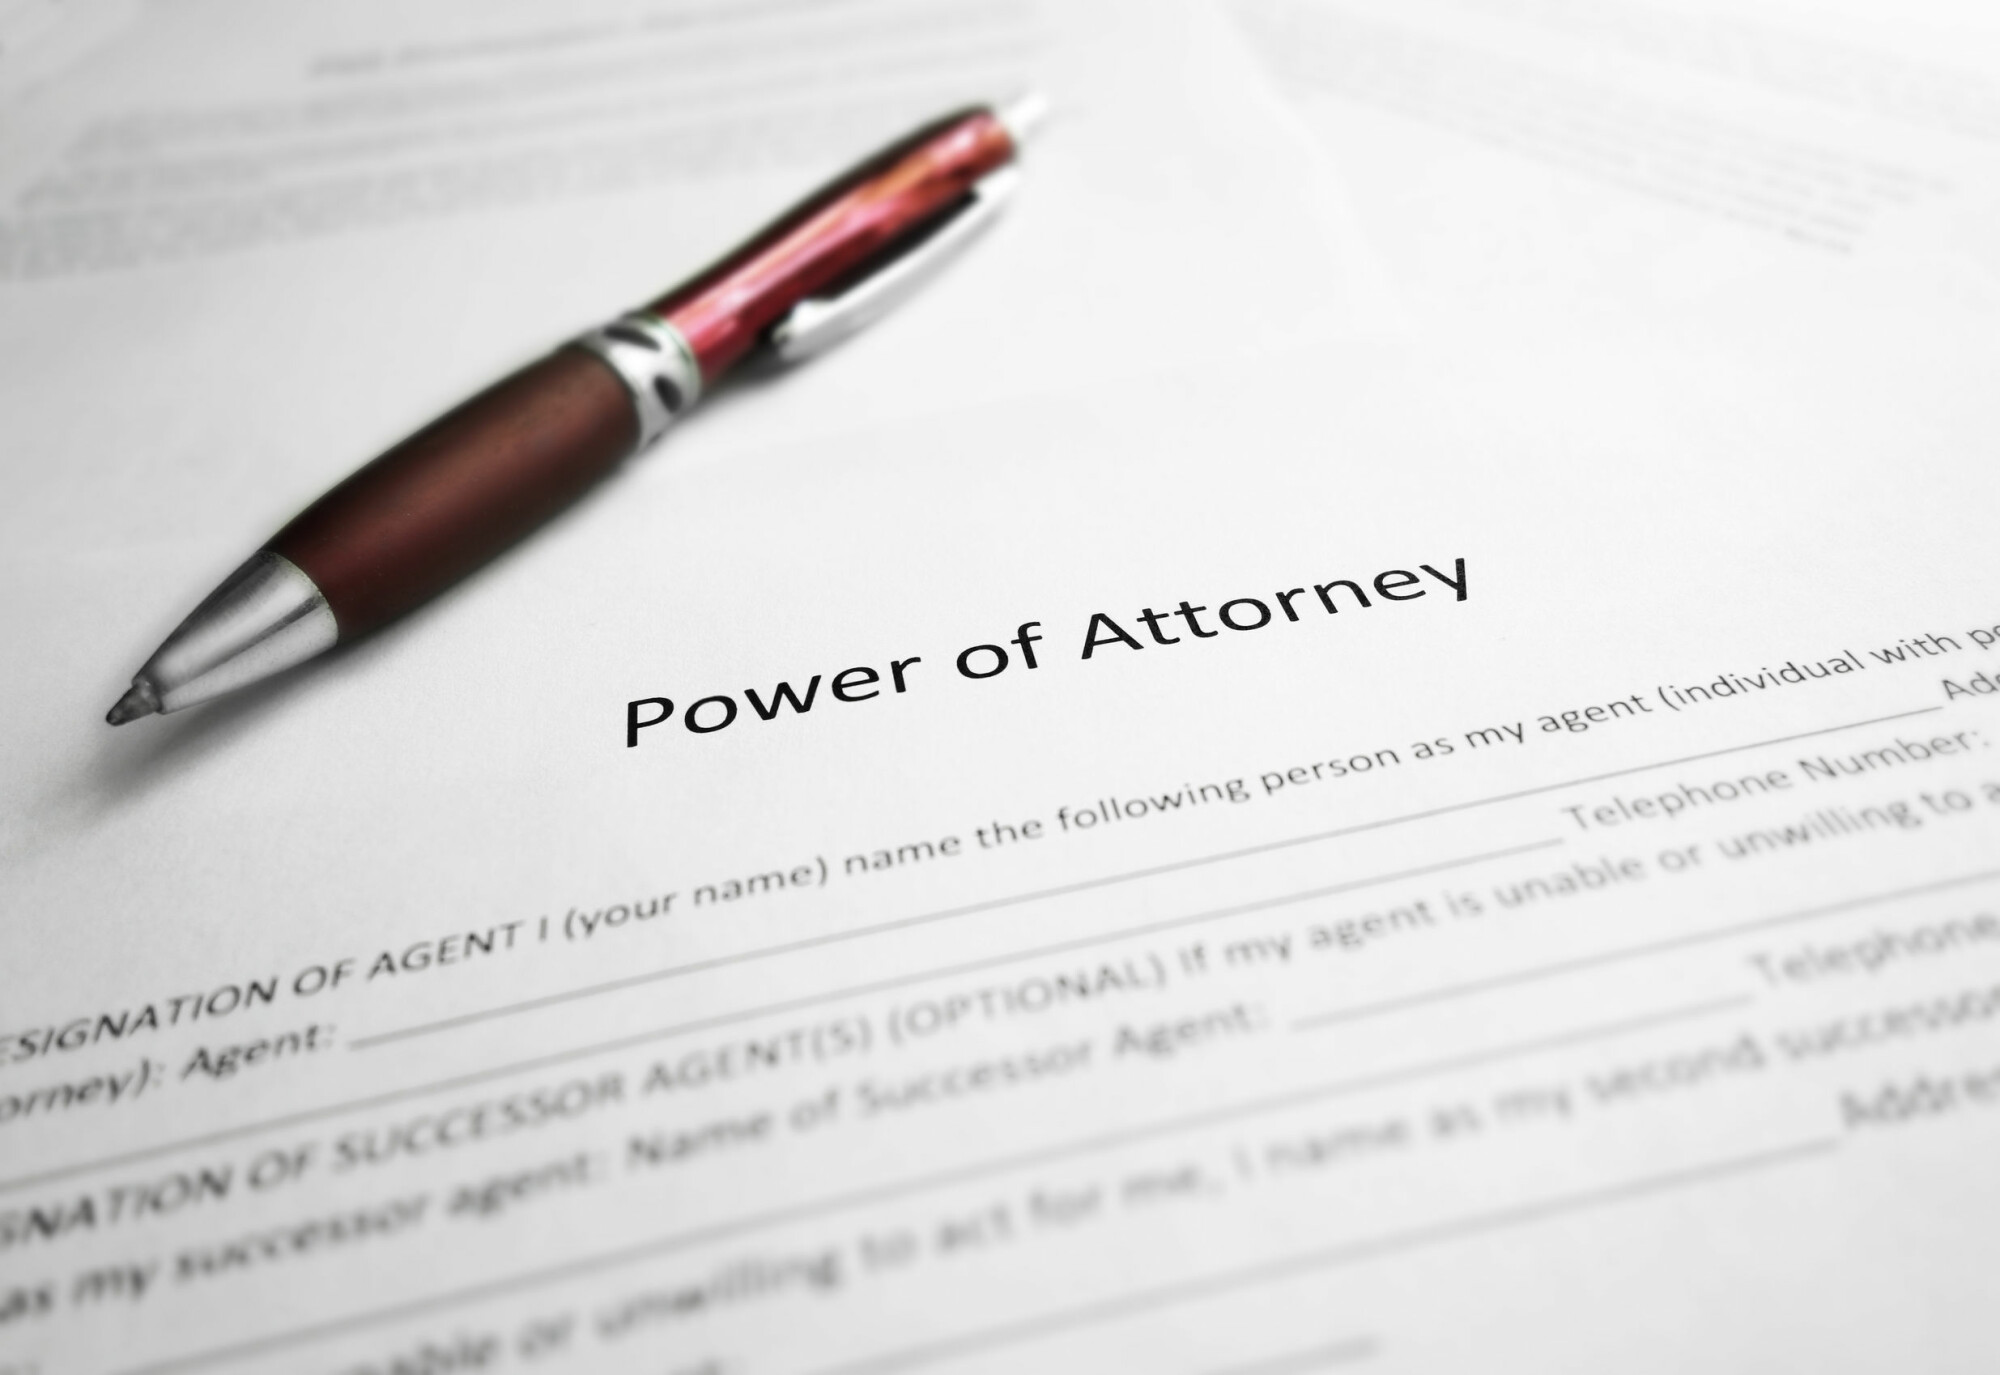 Powers of Attorney document